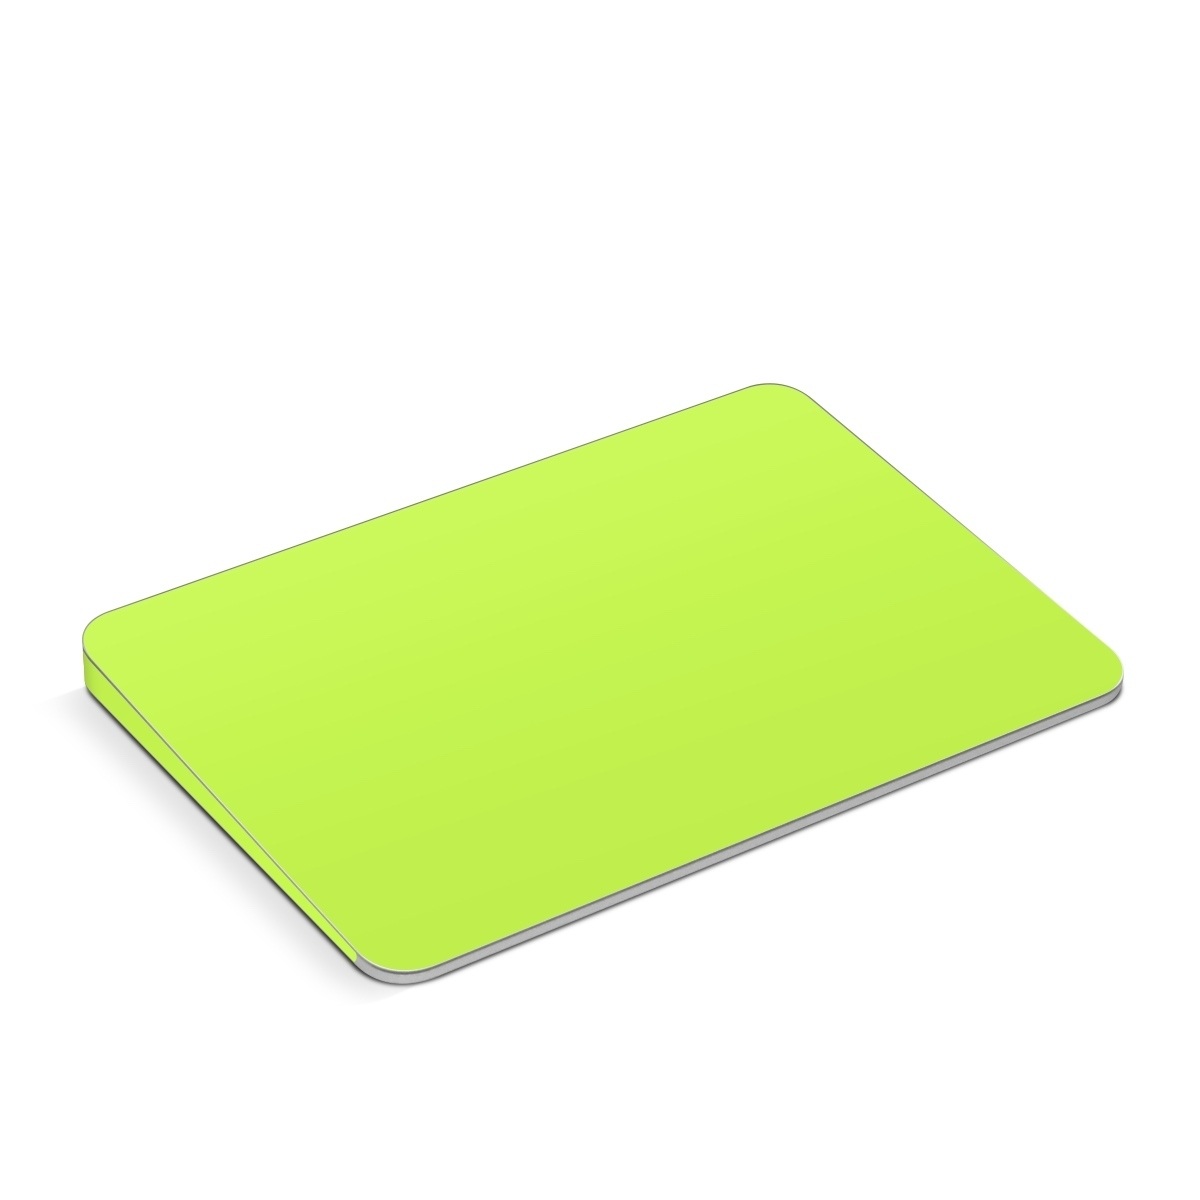 Magic Trackpad Skin - Solid State Lime (Image 1)